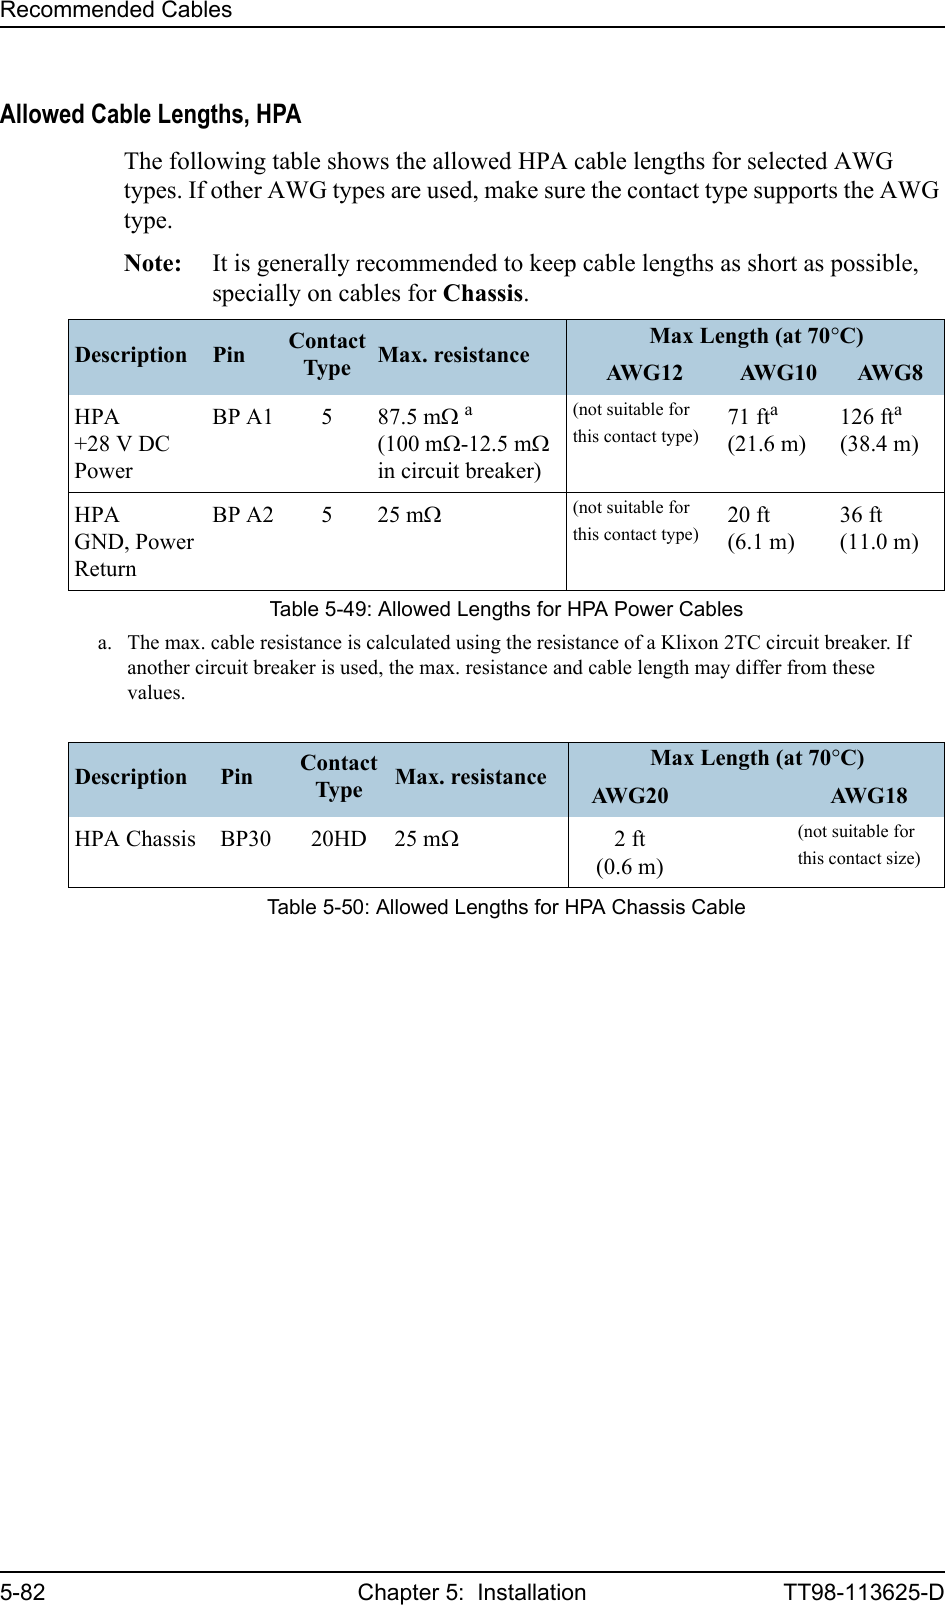 Recommended Cables5-82 Chapter 5:  Installation TT98-113625-DAllowed Cable Lengths, HPAThe following table shows the allowed HPA cable lengths for selected AWG types. If other AWG types are used, make sure the contact type supports the AWG type.Note: It is generally recommended to keep cable lengths as short as possible, specially on cables for Chassis.Description Pin Contact Type Max. resistance Max Length (at 70°C)AW G 1 2 AW G 1 0 AW G 8HPA +28 V DC PowerBP A1 5 87.5 mΩ a(100 mΩ-12.5 mΩ in circuit breaker)a. The max. cable resistance is calculated using the resistance of a Klixon 2TC circuit breaker. If another circuit breaker is used, the max. resistance and cable length may differ from these values.(not suitable for this contact type)71 fta(21.6 m)126 fta(38.4 m)HPA GND, Power ReturnBP A2 5 25 mΩ(not suitable for this contact type)20 ft(6.1 m)36 ft(11.0 m)Table 5-49: Allowed Lengths for HPA Power CablesDescription Pin Contact Type Max. resistance Max Length (at 70°C)AW G 2 0 AW G 1 8HPA Chassis BP30 20HD 25 mΩ2ft(0.6 m)(not suitable for this contact size)Table 5-50: Allowed Lengths for HPA Chassis Cable